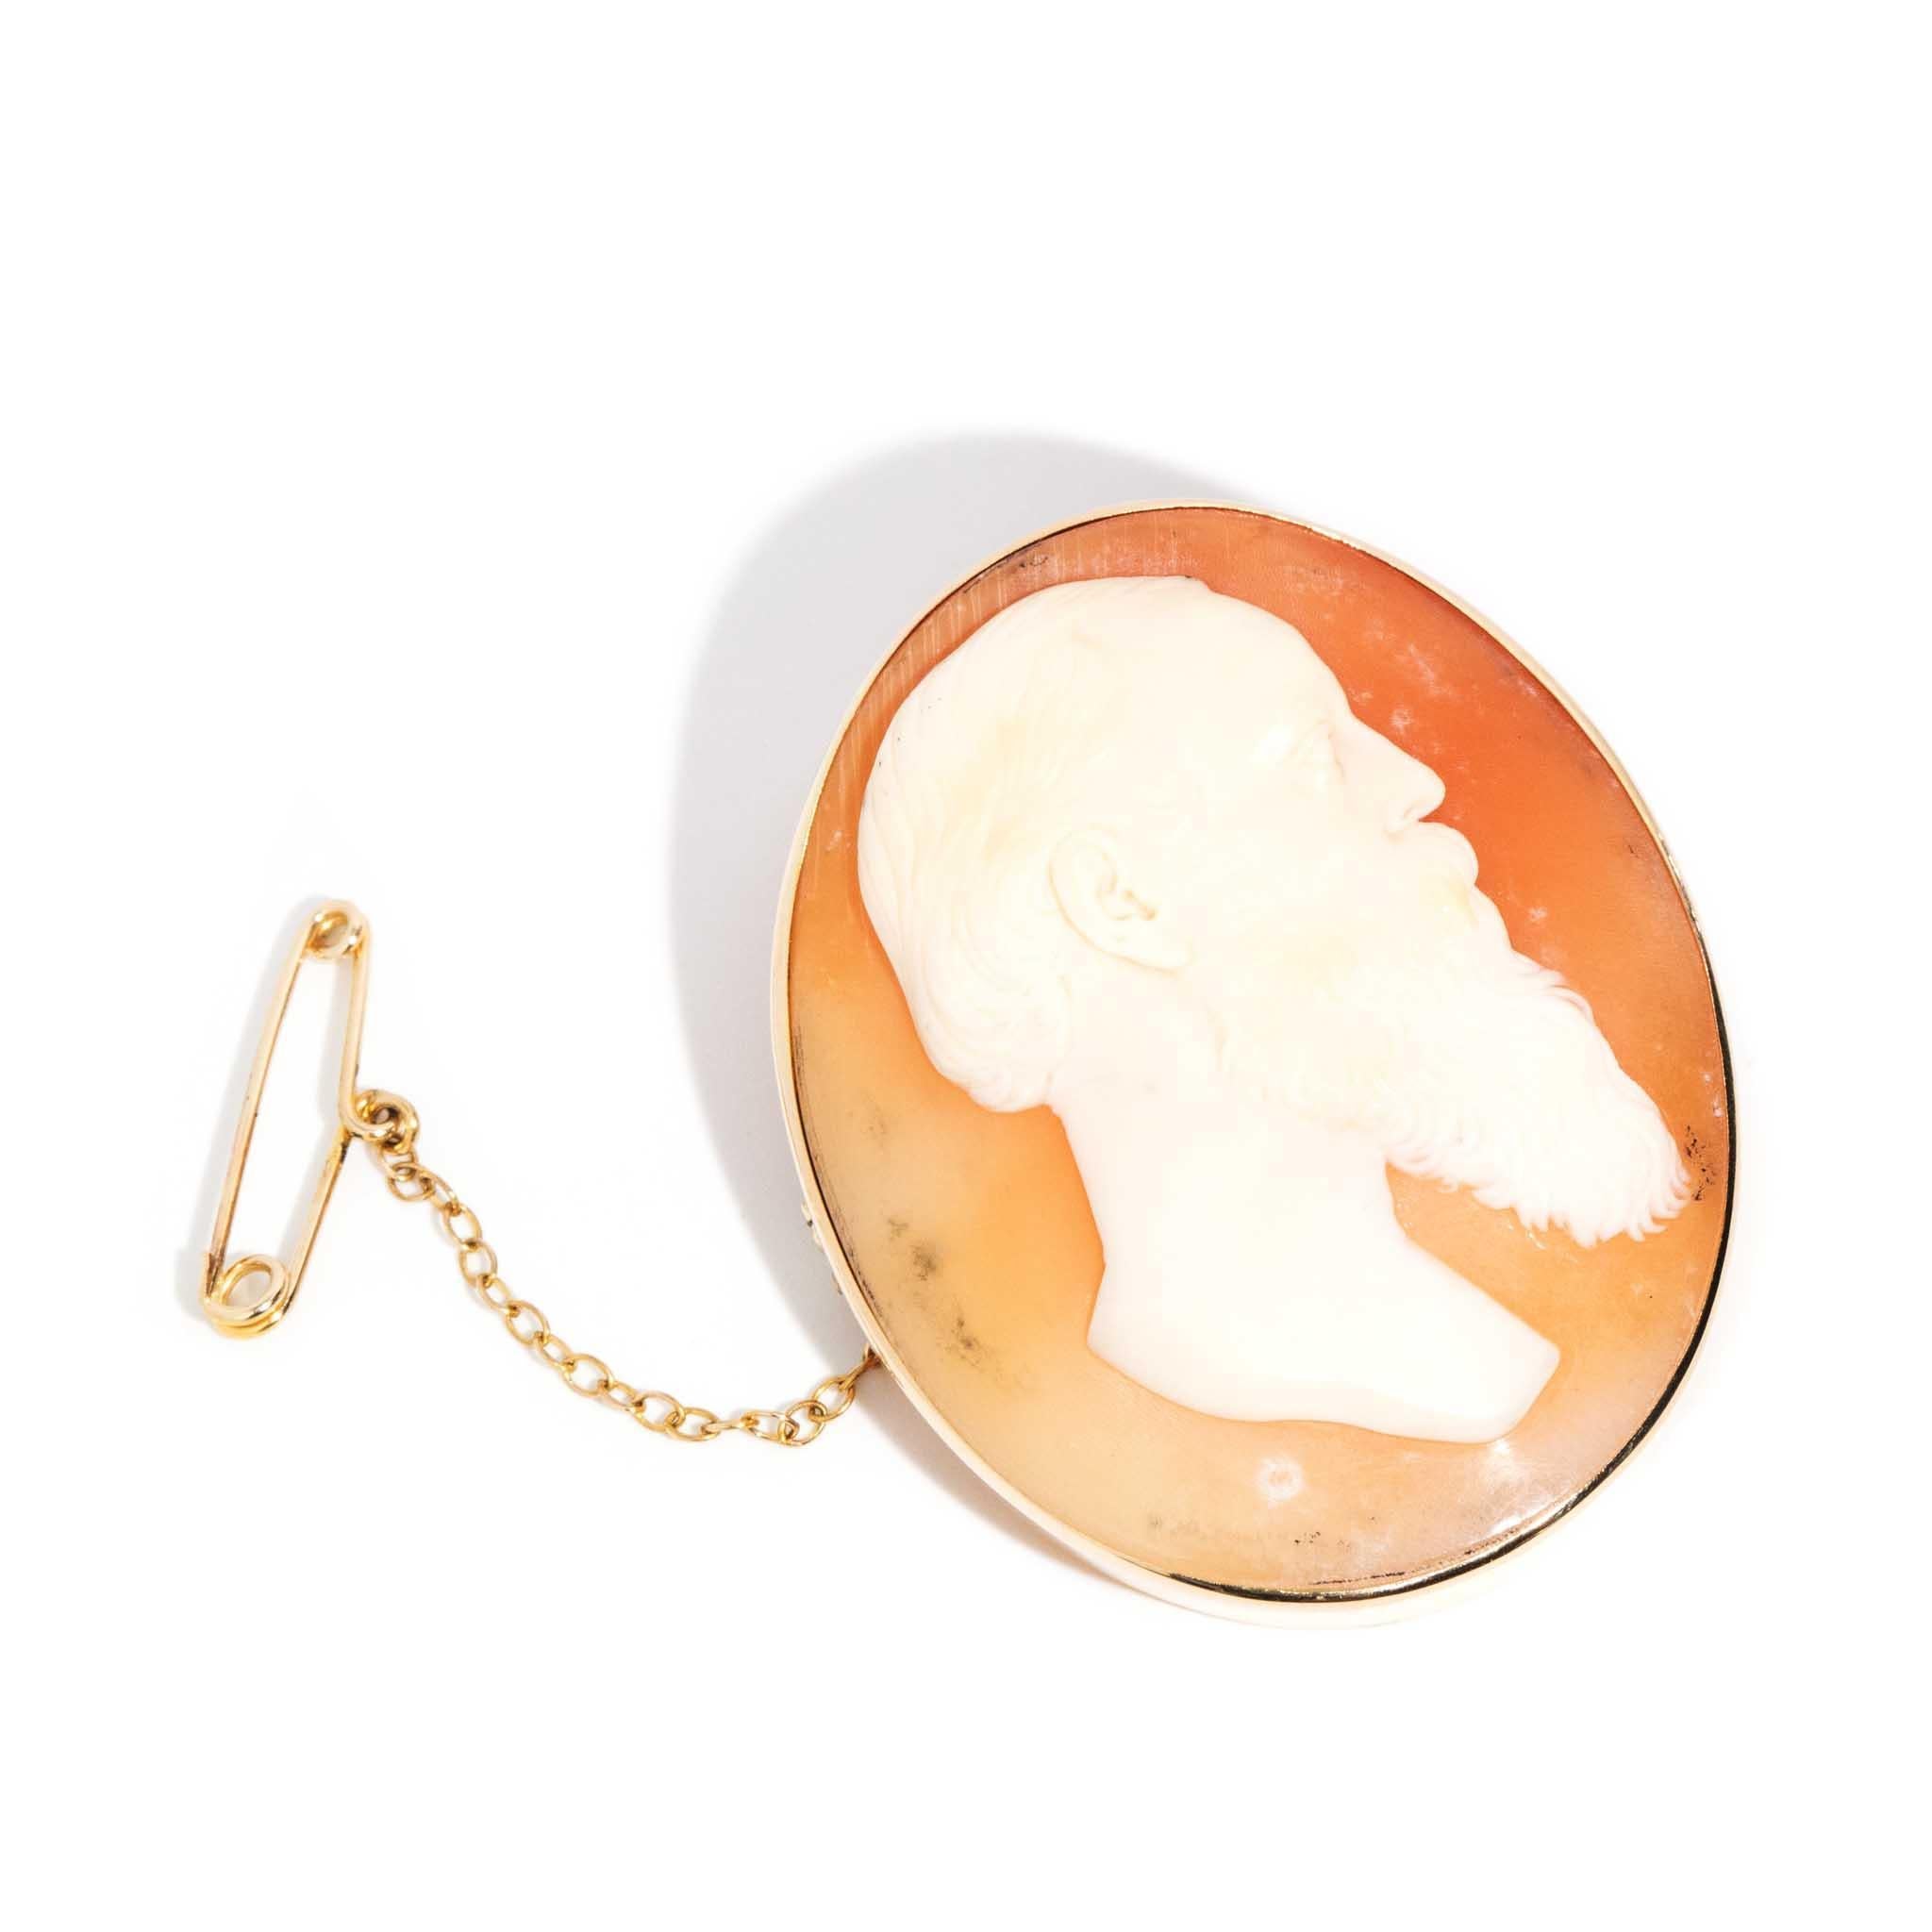 Crafted in 15 carat gold, The Karina Brooch, having hailed from The Victorian Era is one for the collector of antique jewels. Known as The Wise Man Cameo she is intricately carved from shell, a classic style of jewellery that has lasted